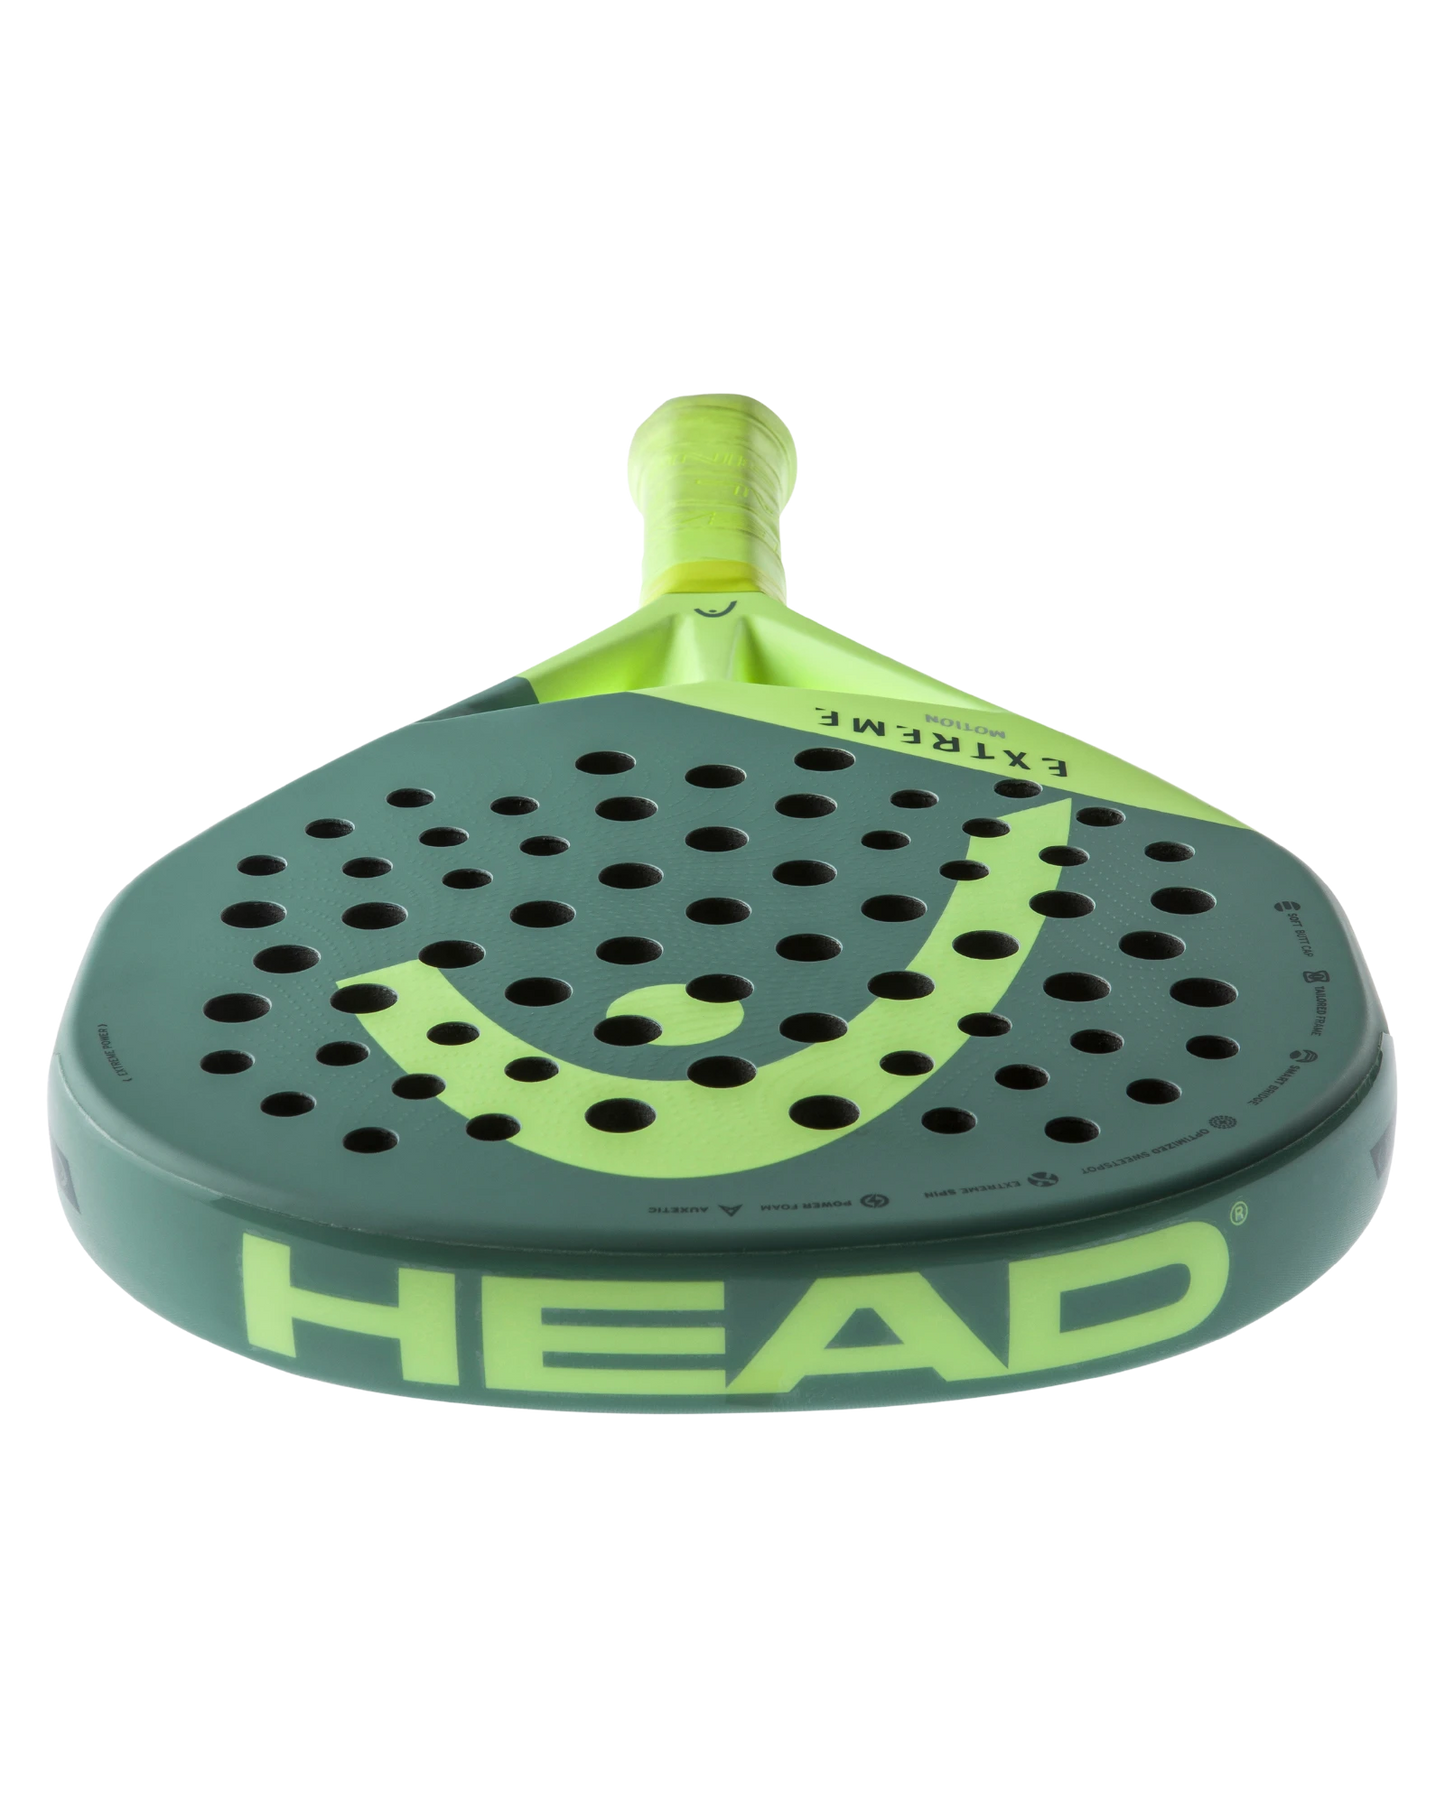 The Head Extreme Motion Padel Racket